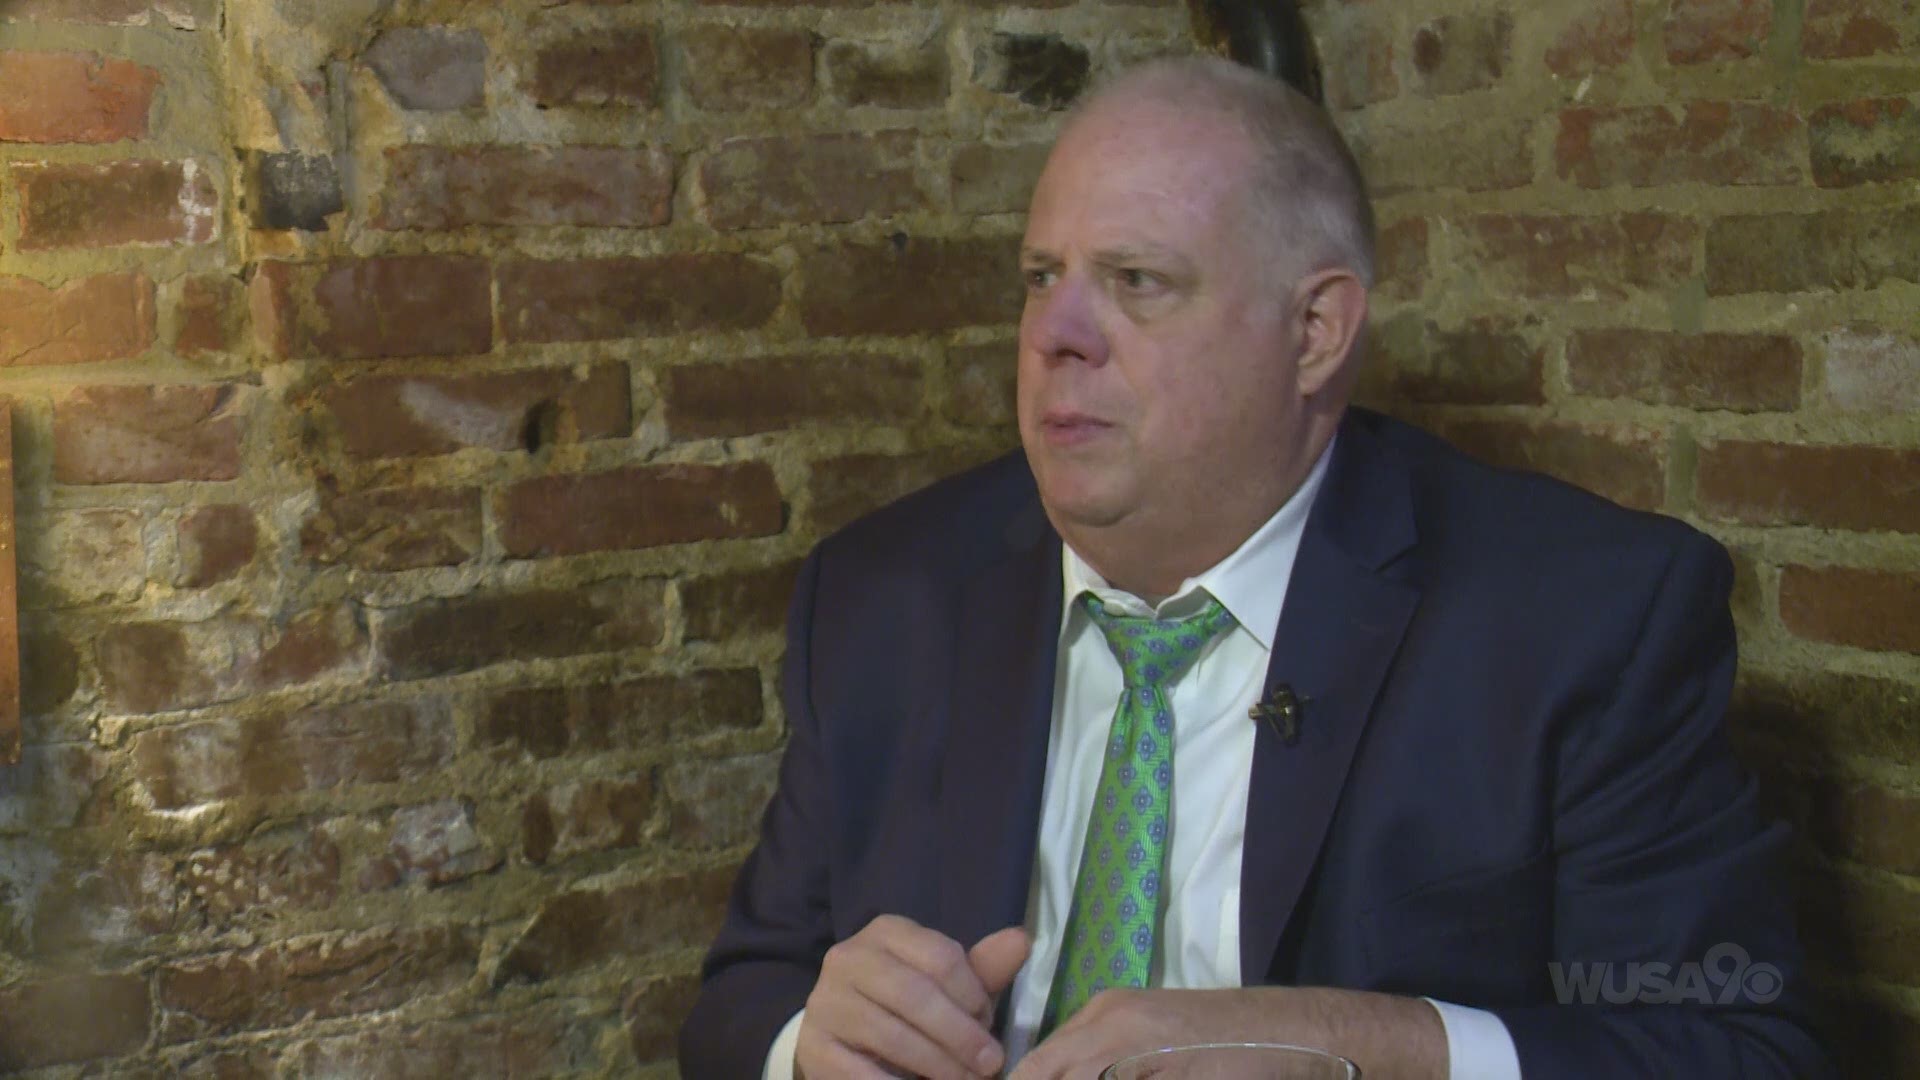 Bruce Johnson sits down with Gov. Larry Hogan to discuss surviving cancer. He says it opened his eyes, and saw folks who had it much worse than him. "It made me realize the important things in life," he said. "It made me realize that life is short."